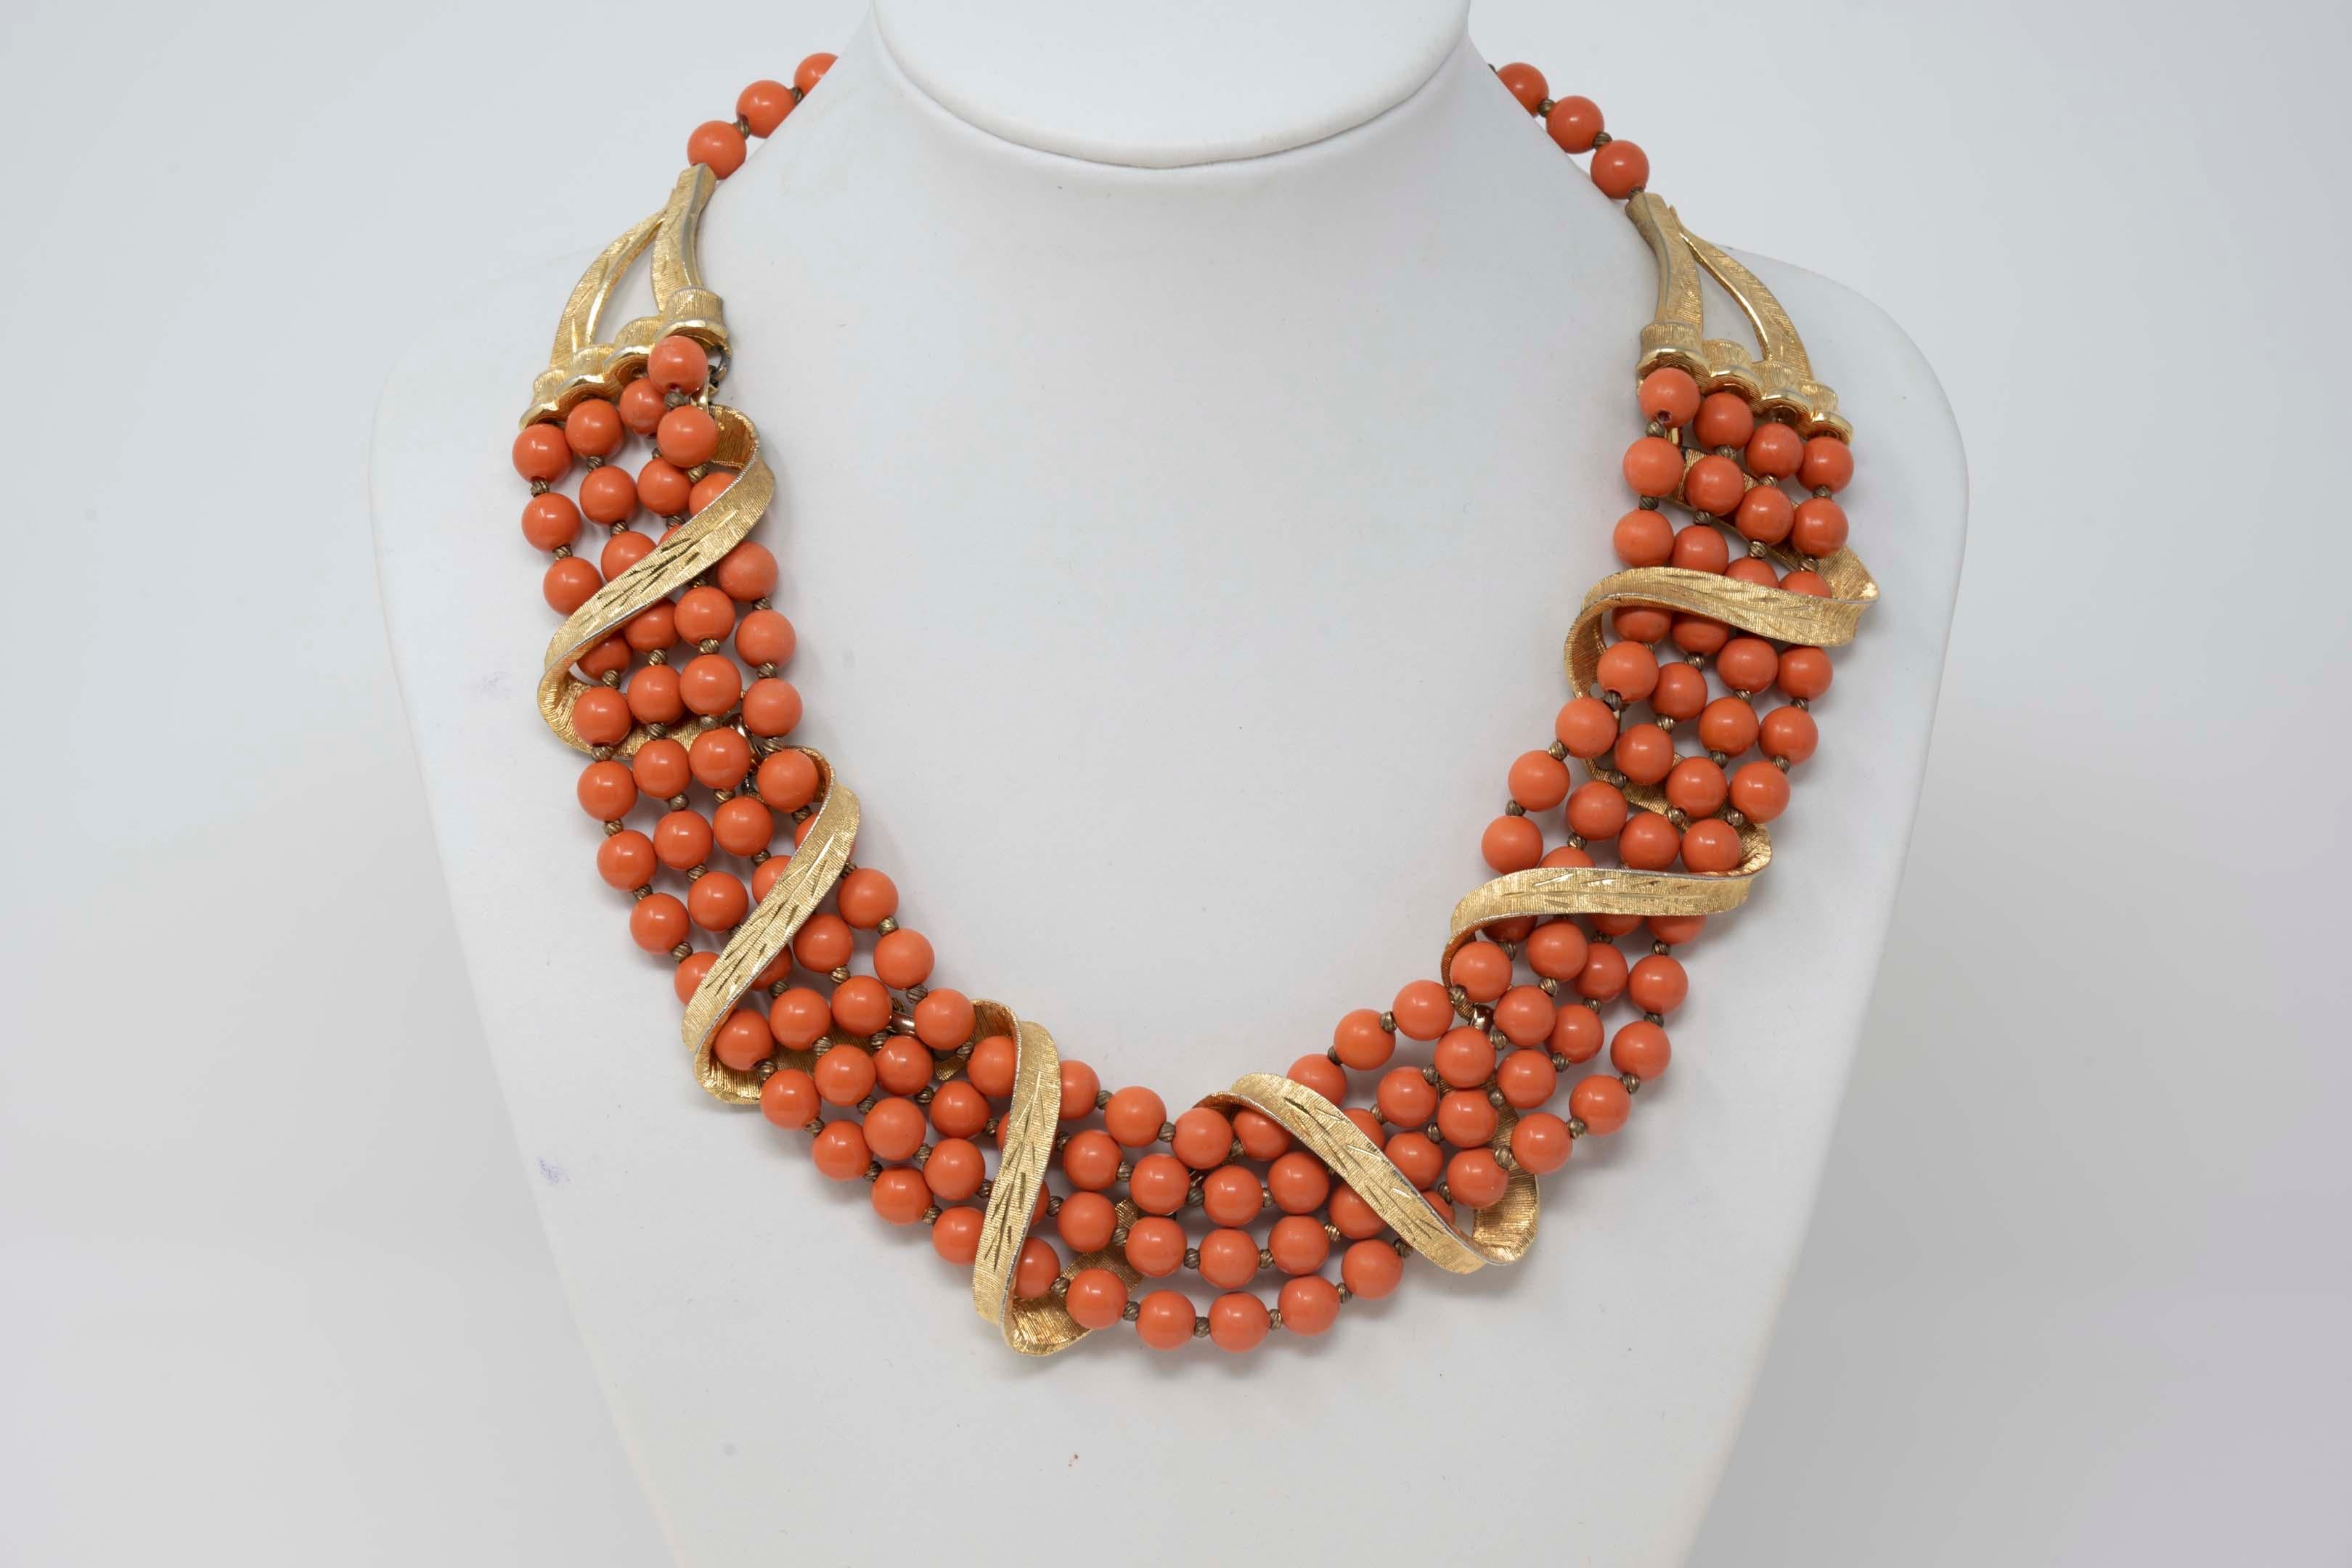 Vintage Kramer multistrand necklace with gilt metal and coral color beads. Stamped on the back, 17 1/2 inches long x 1 1/4 inches wide. Made in the USA, circa 1950-1960. In good condition.
